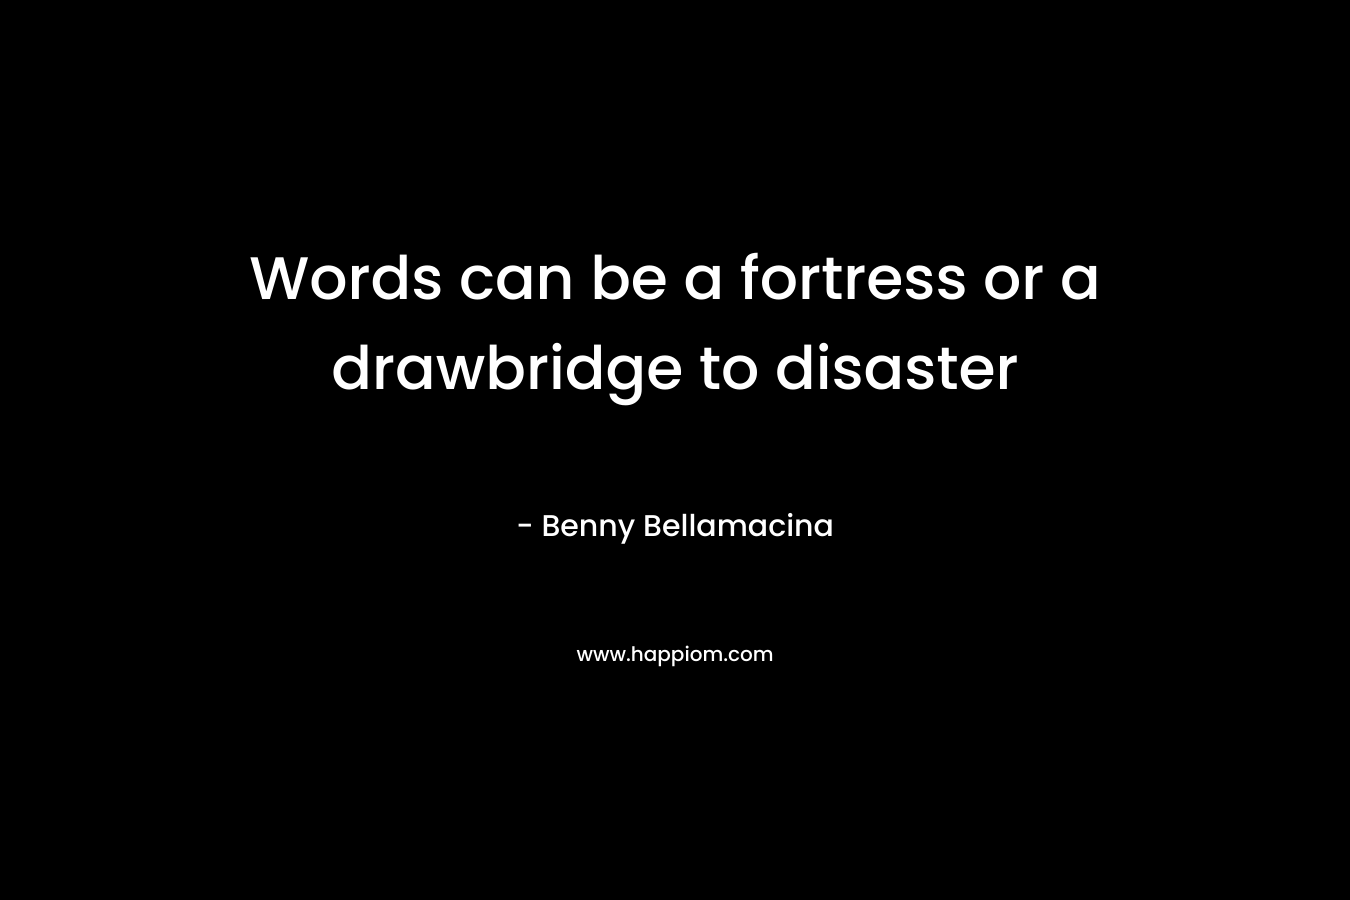 Words can be a fortress or a drawbridge to disaster